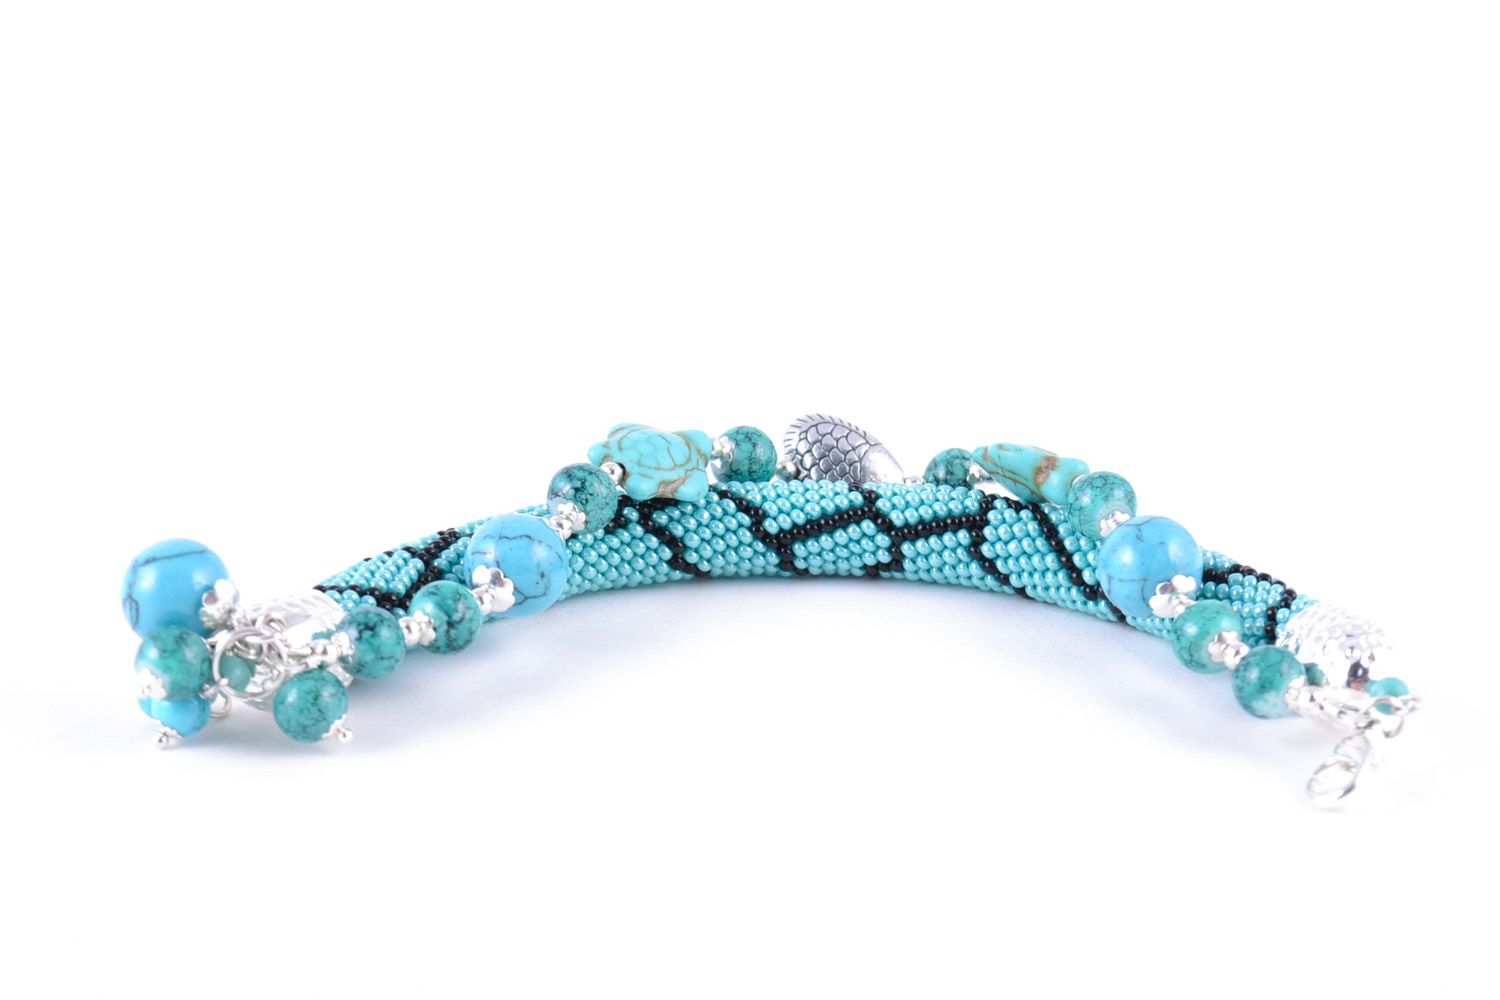 Handmade beaded cord necklace woven of seed beads and turquoise stone with metal fittings photo 5